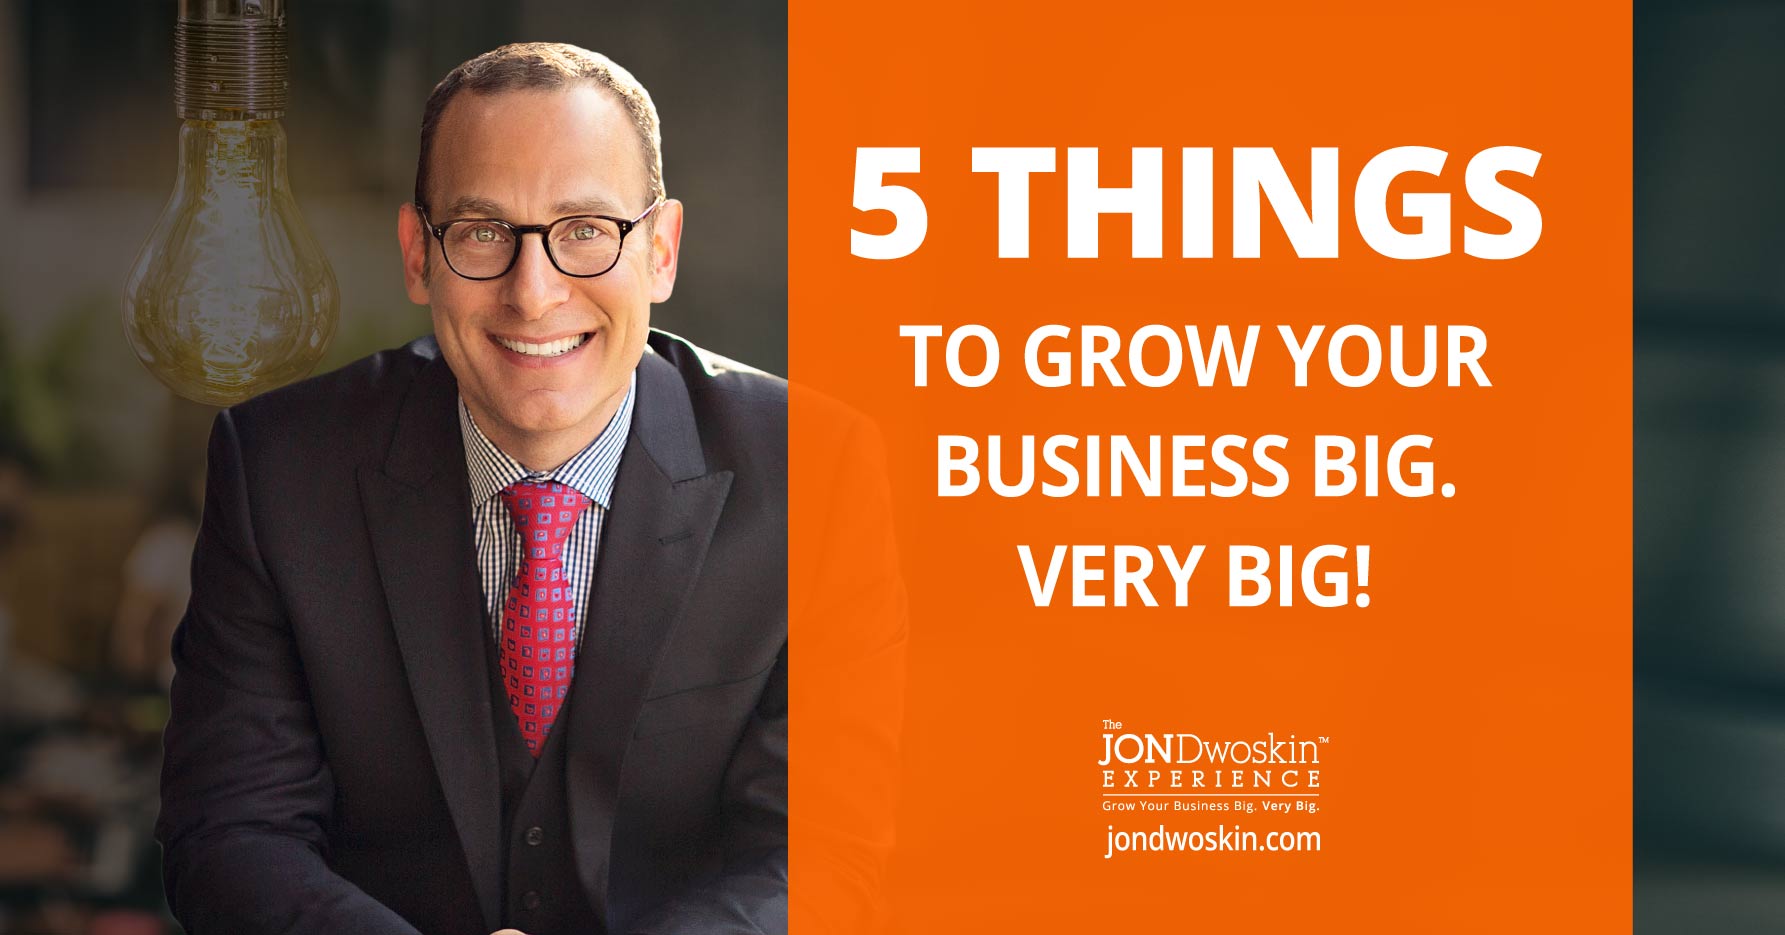 5 Things to Grow Your Business Big. Very Big!